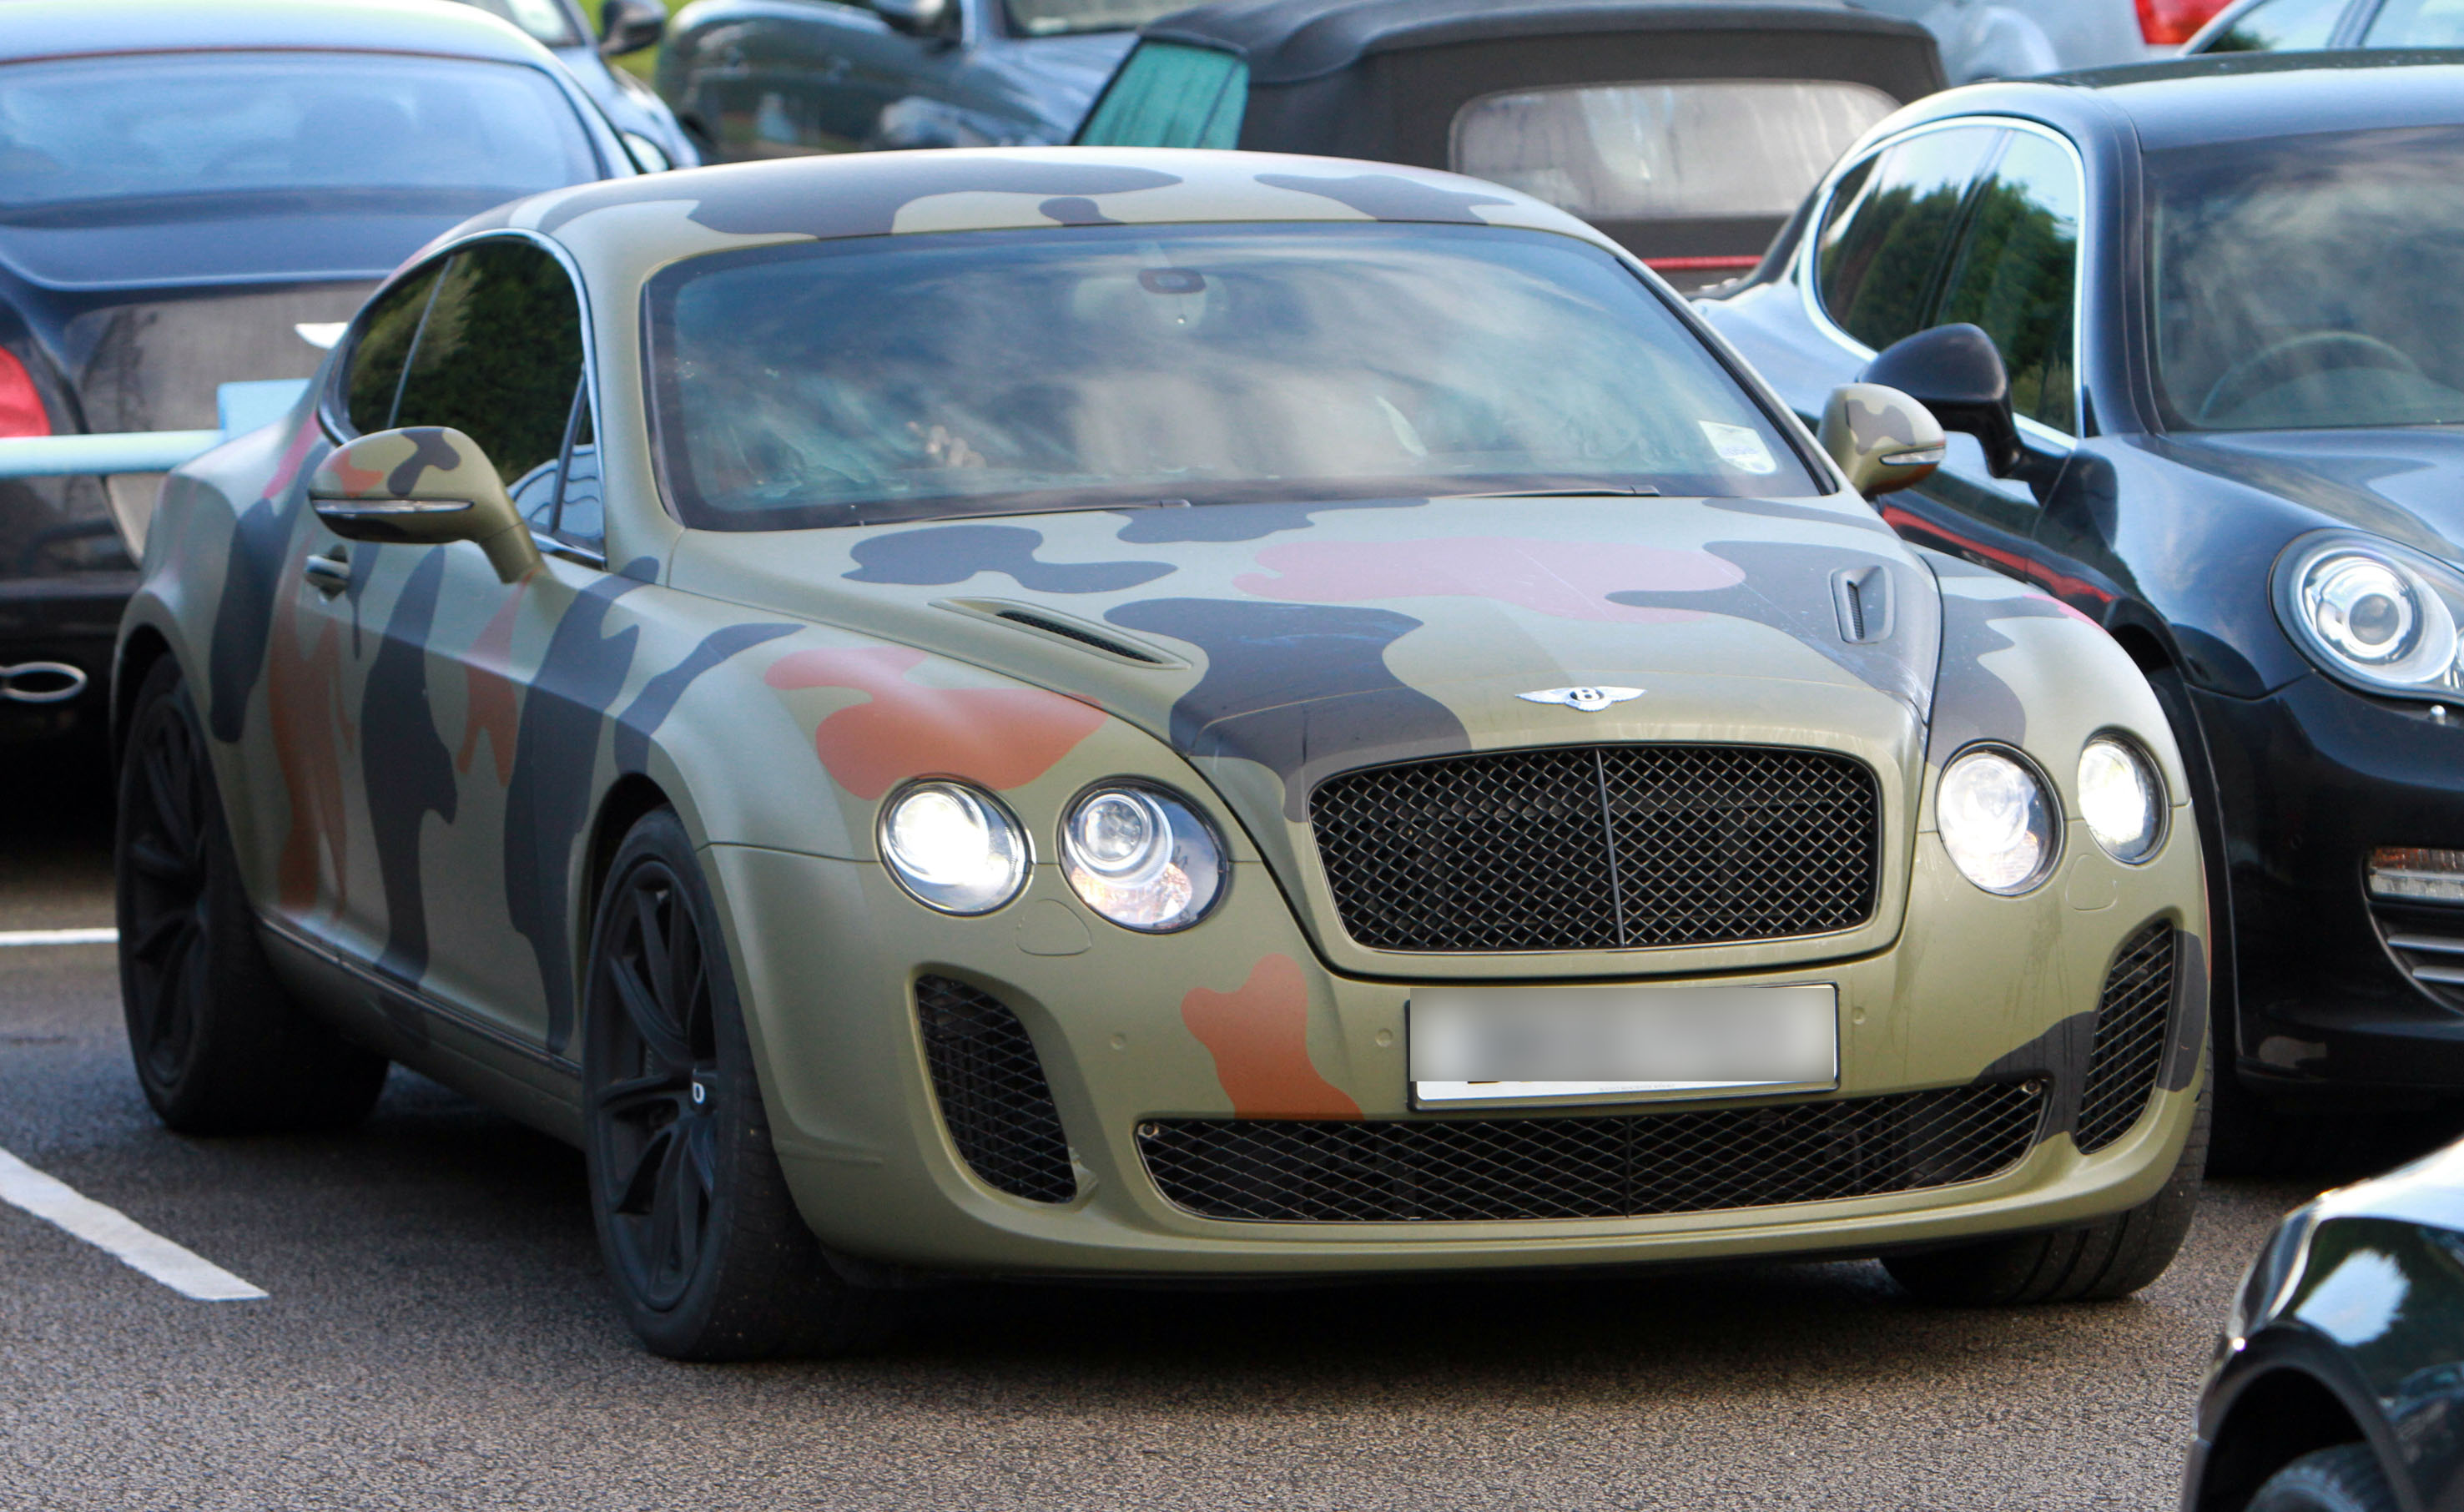 Mario Balotelli with his camouflage car leaving Manchester City training ground